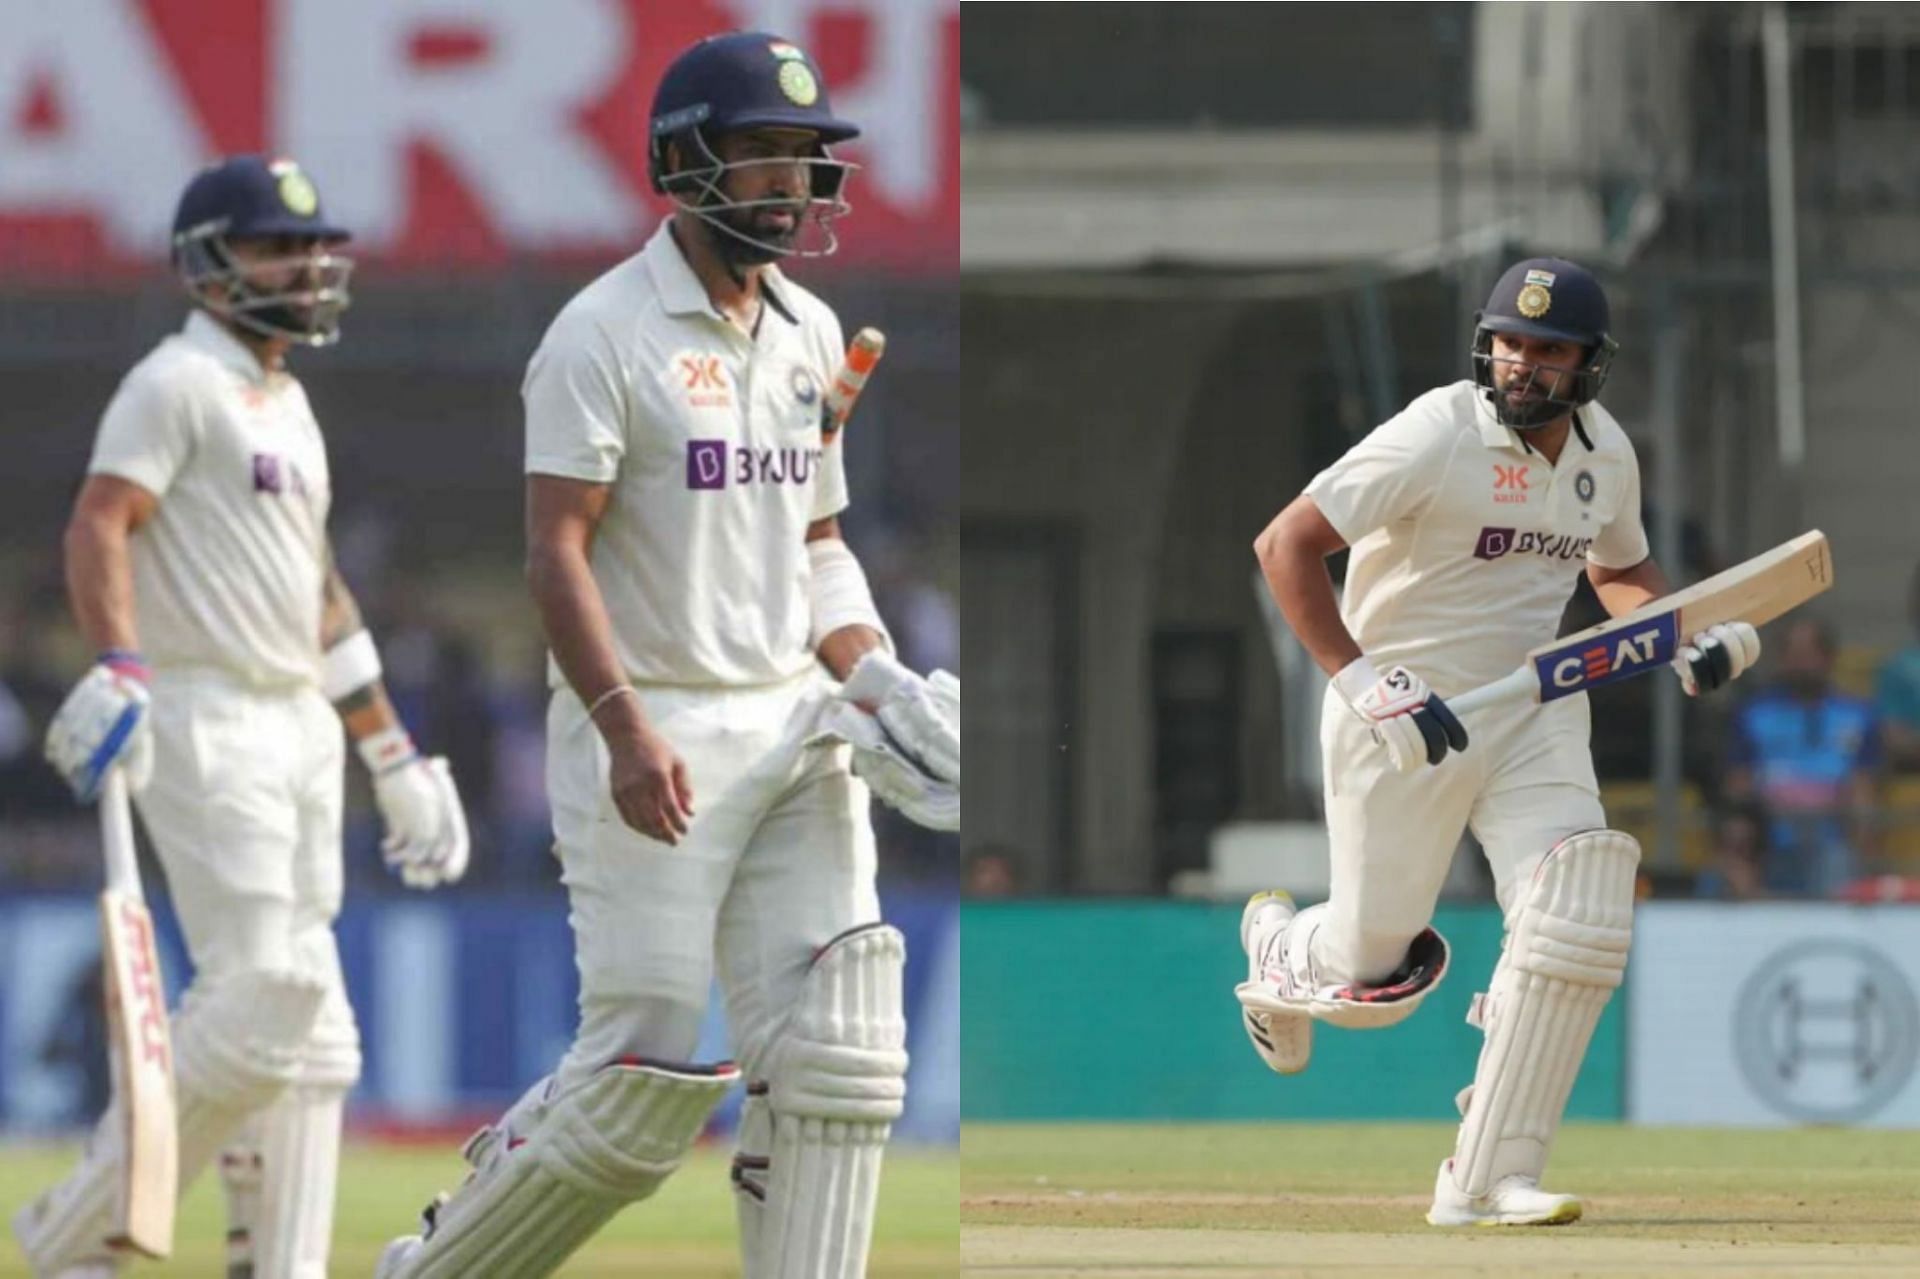 Team India registered only 109 runs in the first innings of the Indore Test 